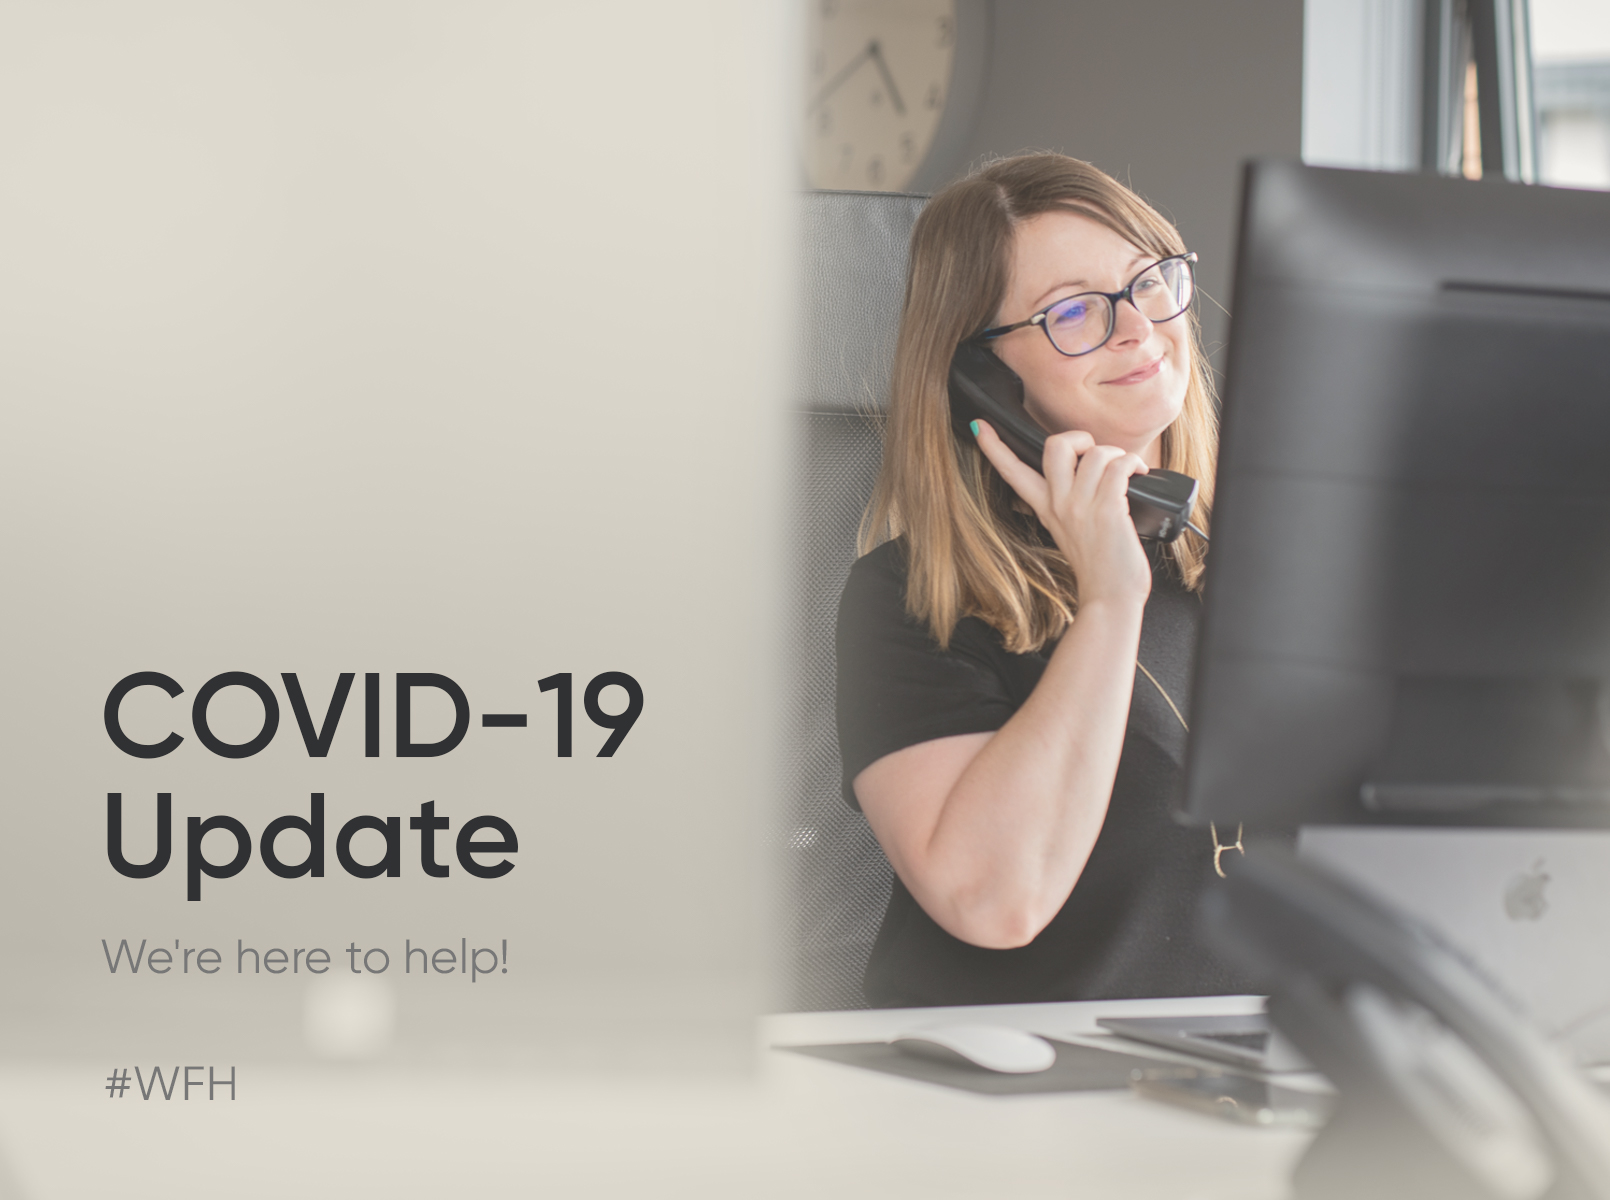 COVID-19 update: We’re still here to help!